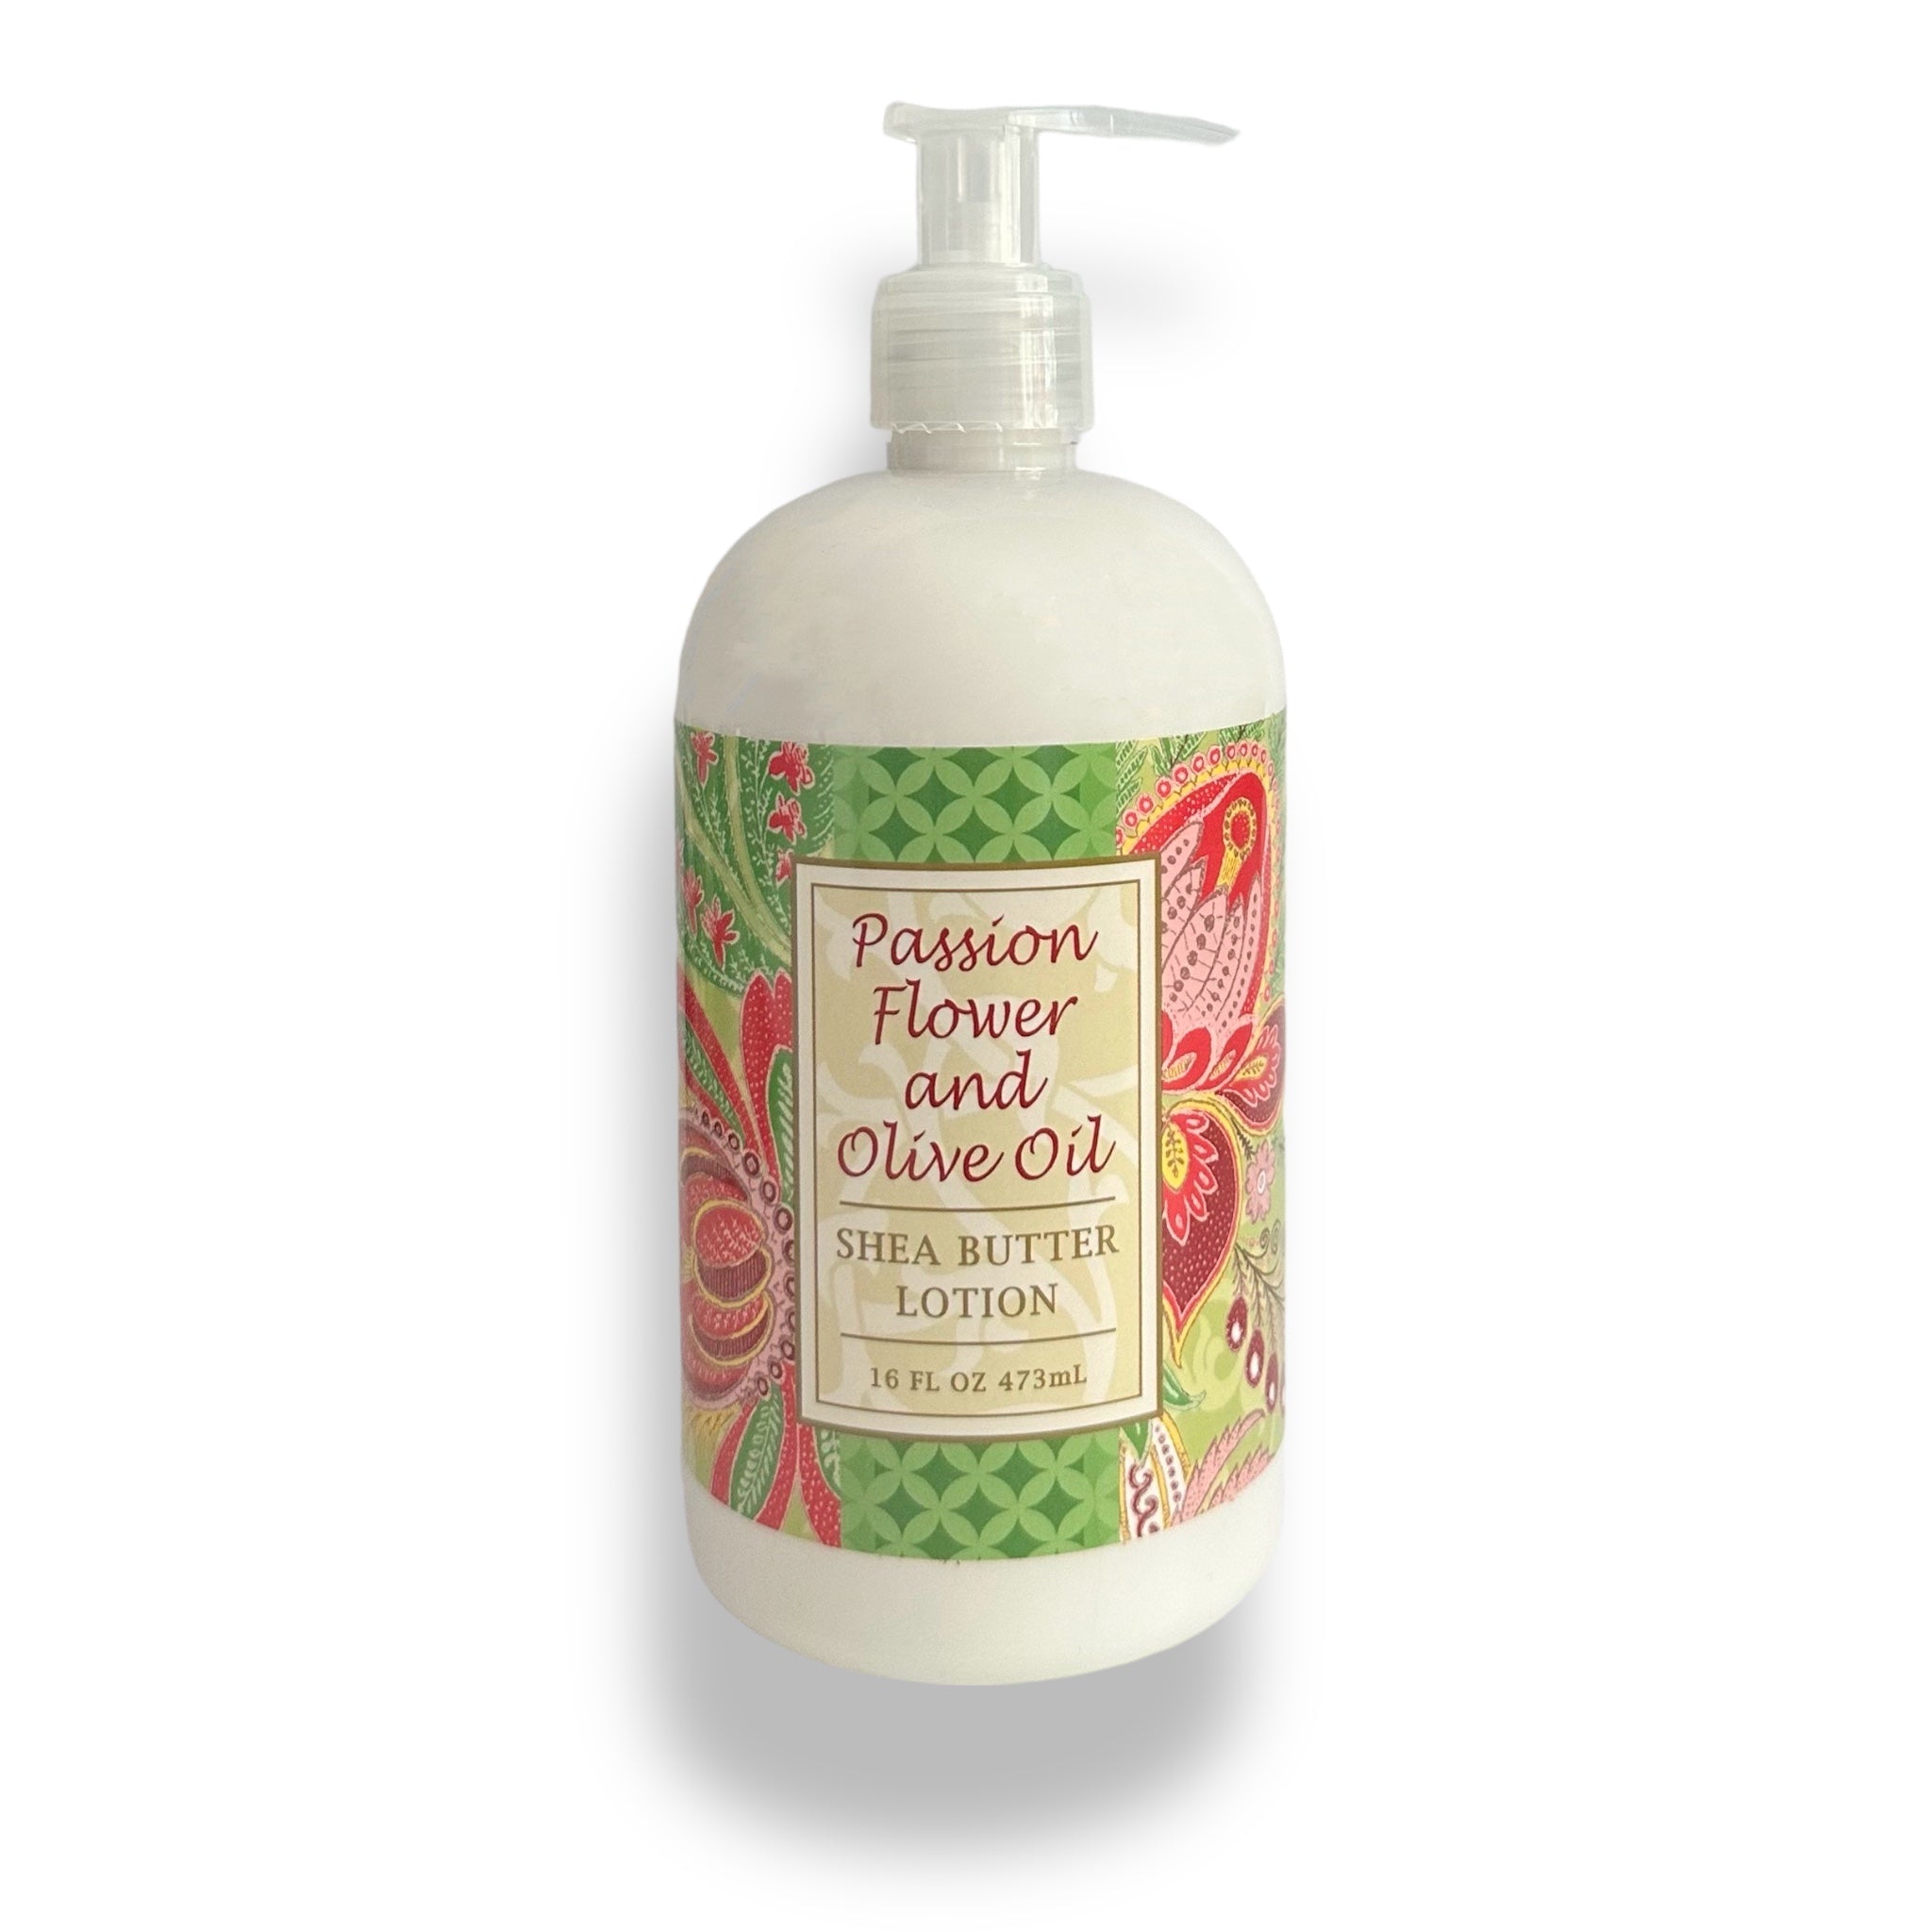 Greenwich Bay Trading Company Passion Flower Olive Oil Lotion